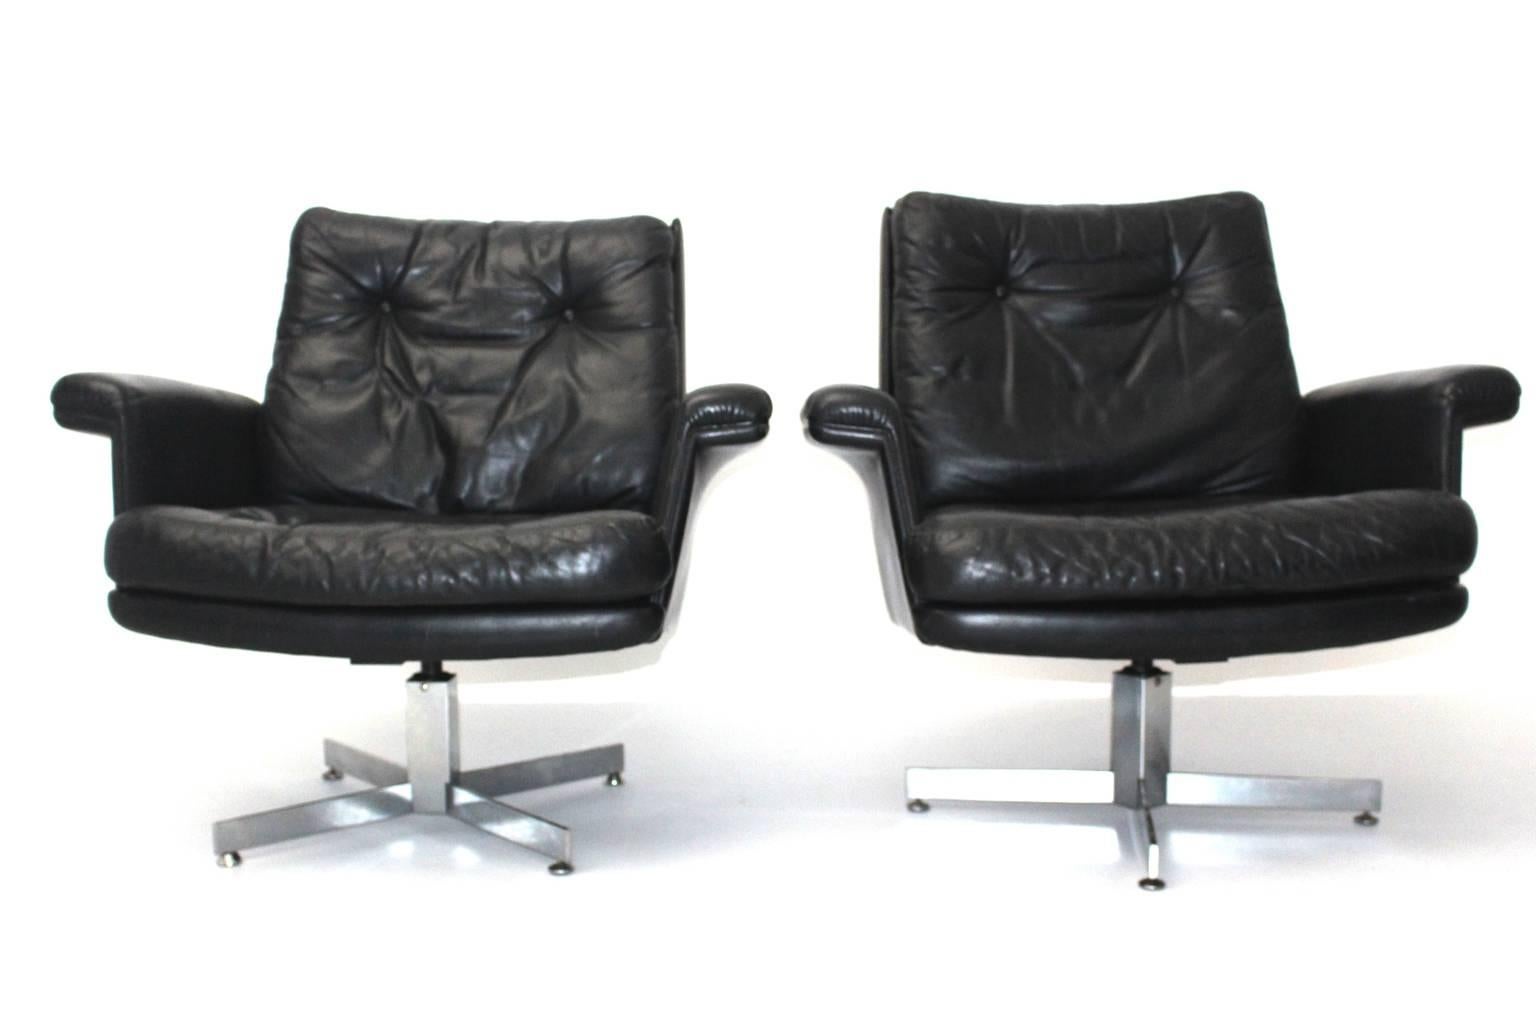 Scandinavian Modern vintage lounge chairs or club chairs from leather, steel and chromed metal 1960s Denmark by Henry Walter Klein.
The freestanding lounge chairs or club chairs by H.W.Klein 1960s Denmark were designed in the same era like leather